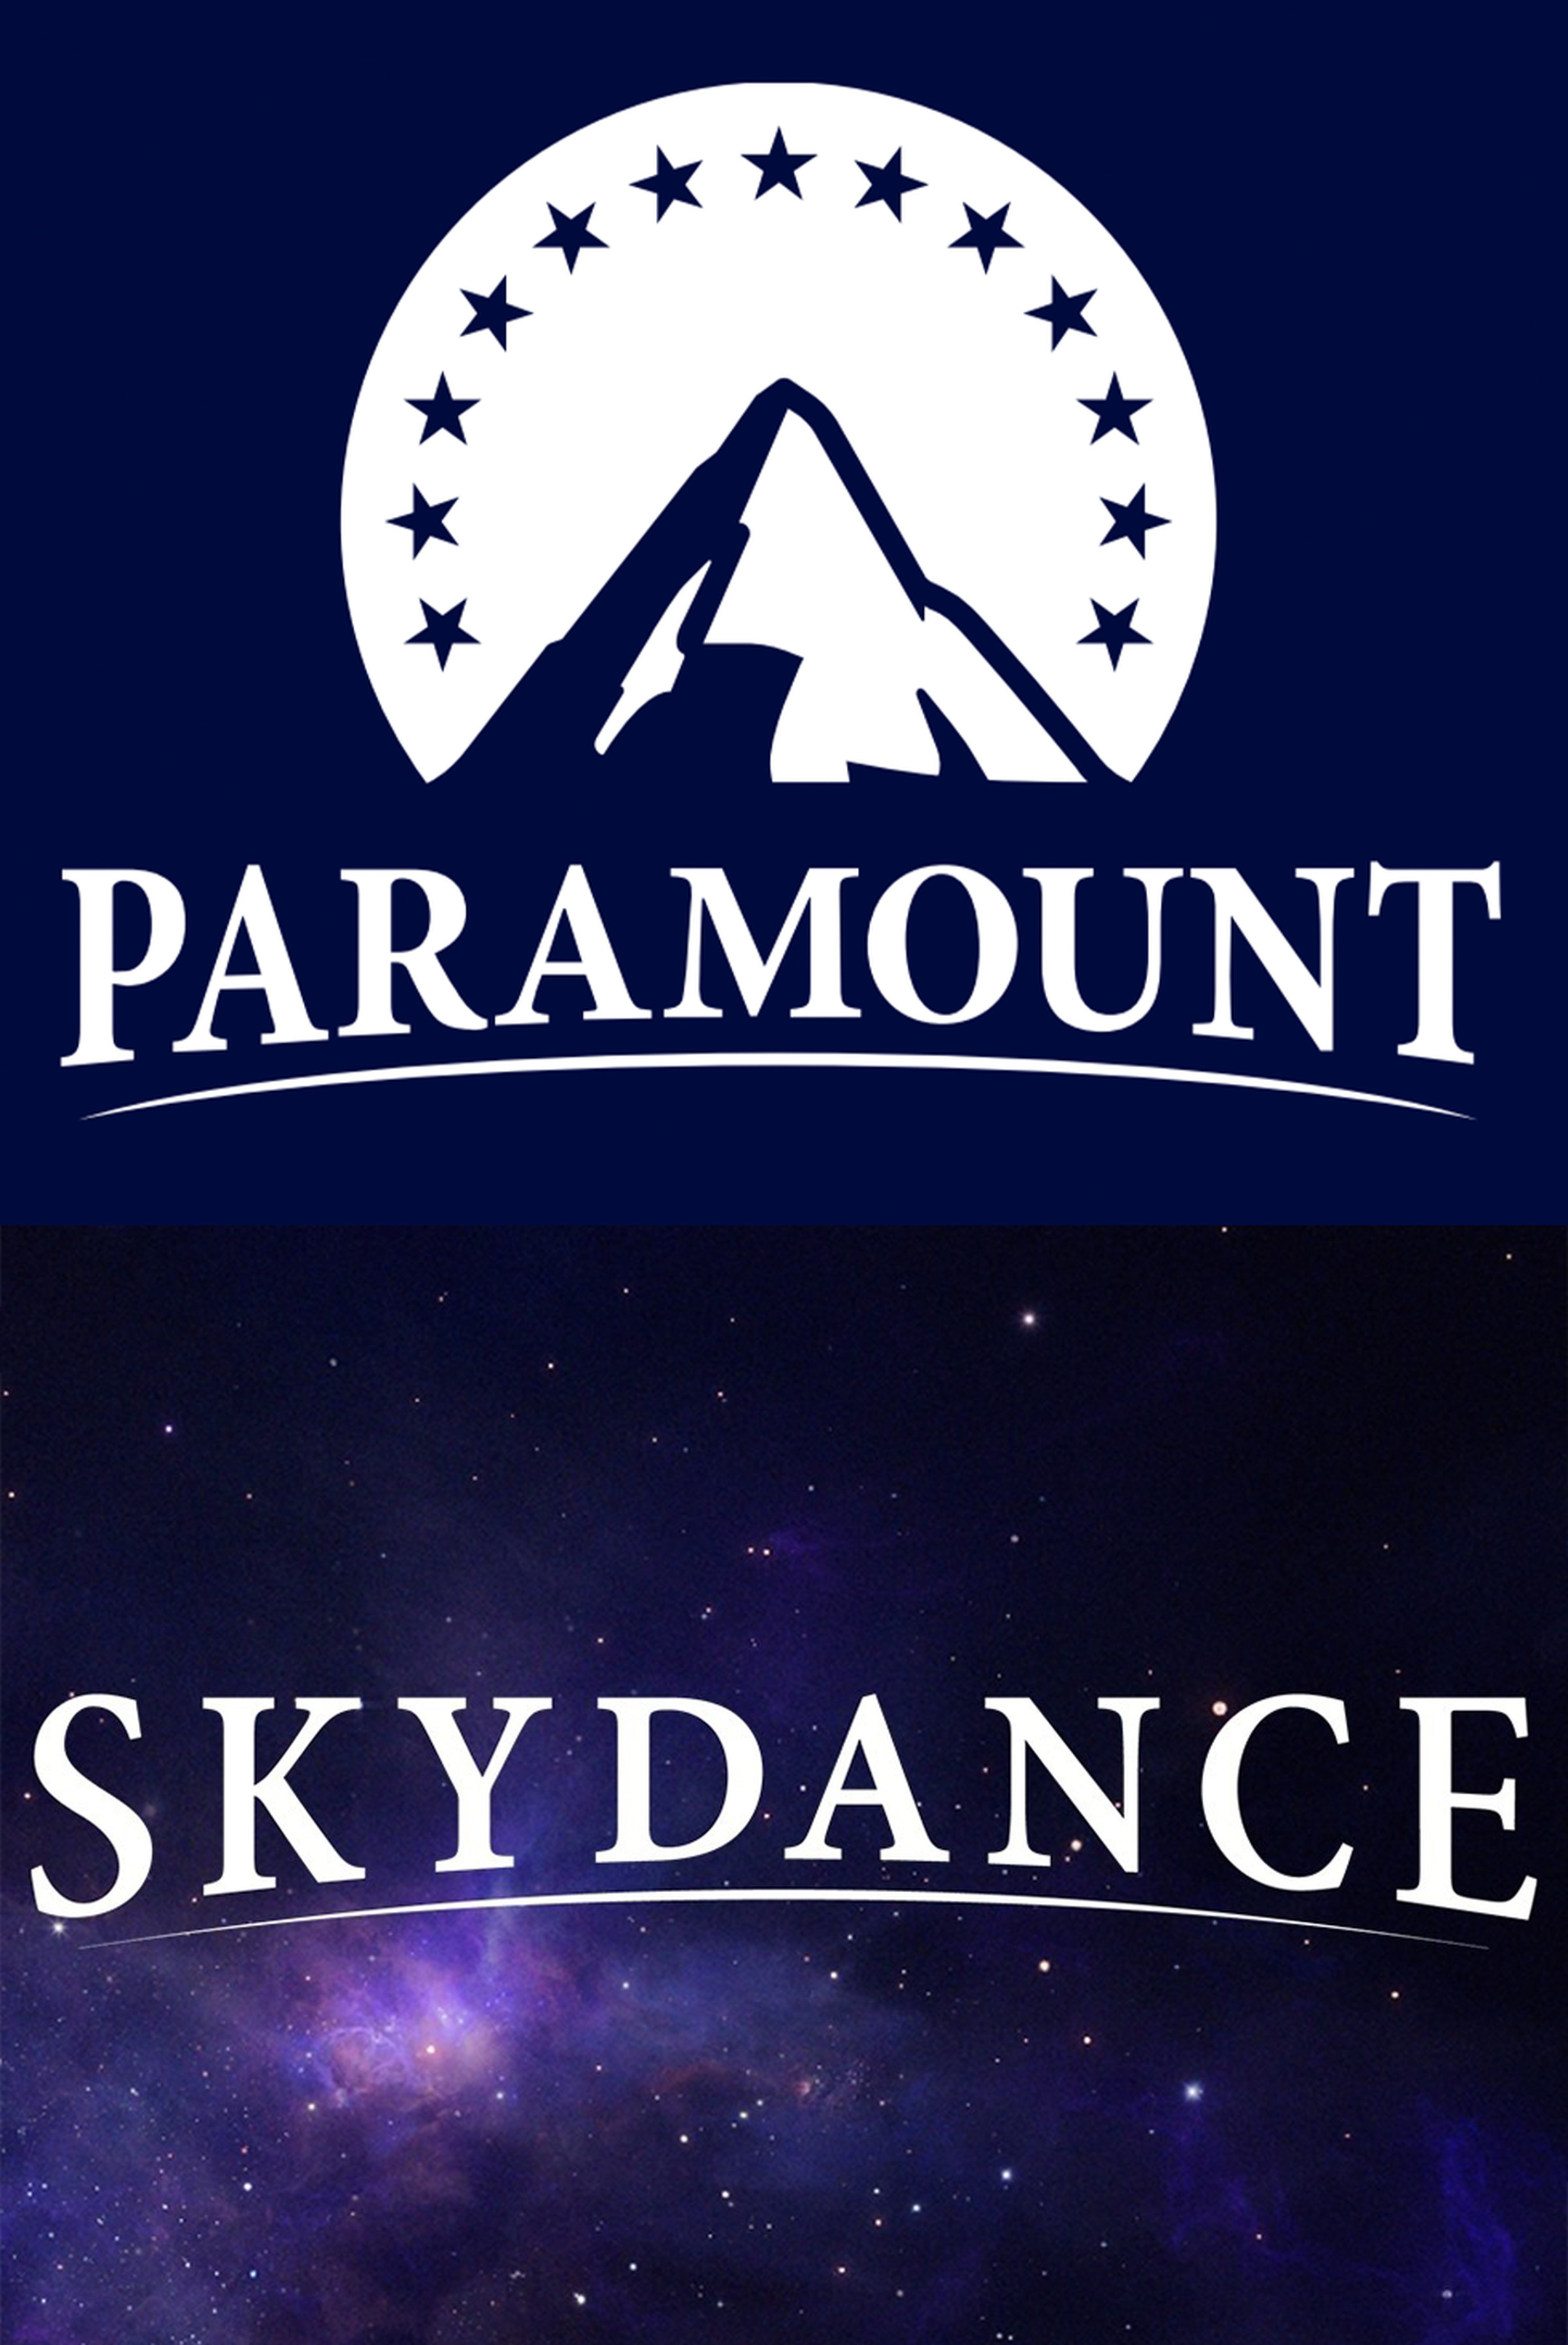 A comparison showing similarities between the Paramount logo (top) versus the Skydance logo (bottom)